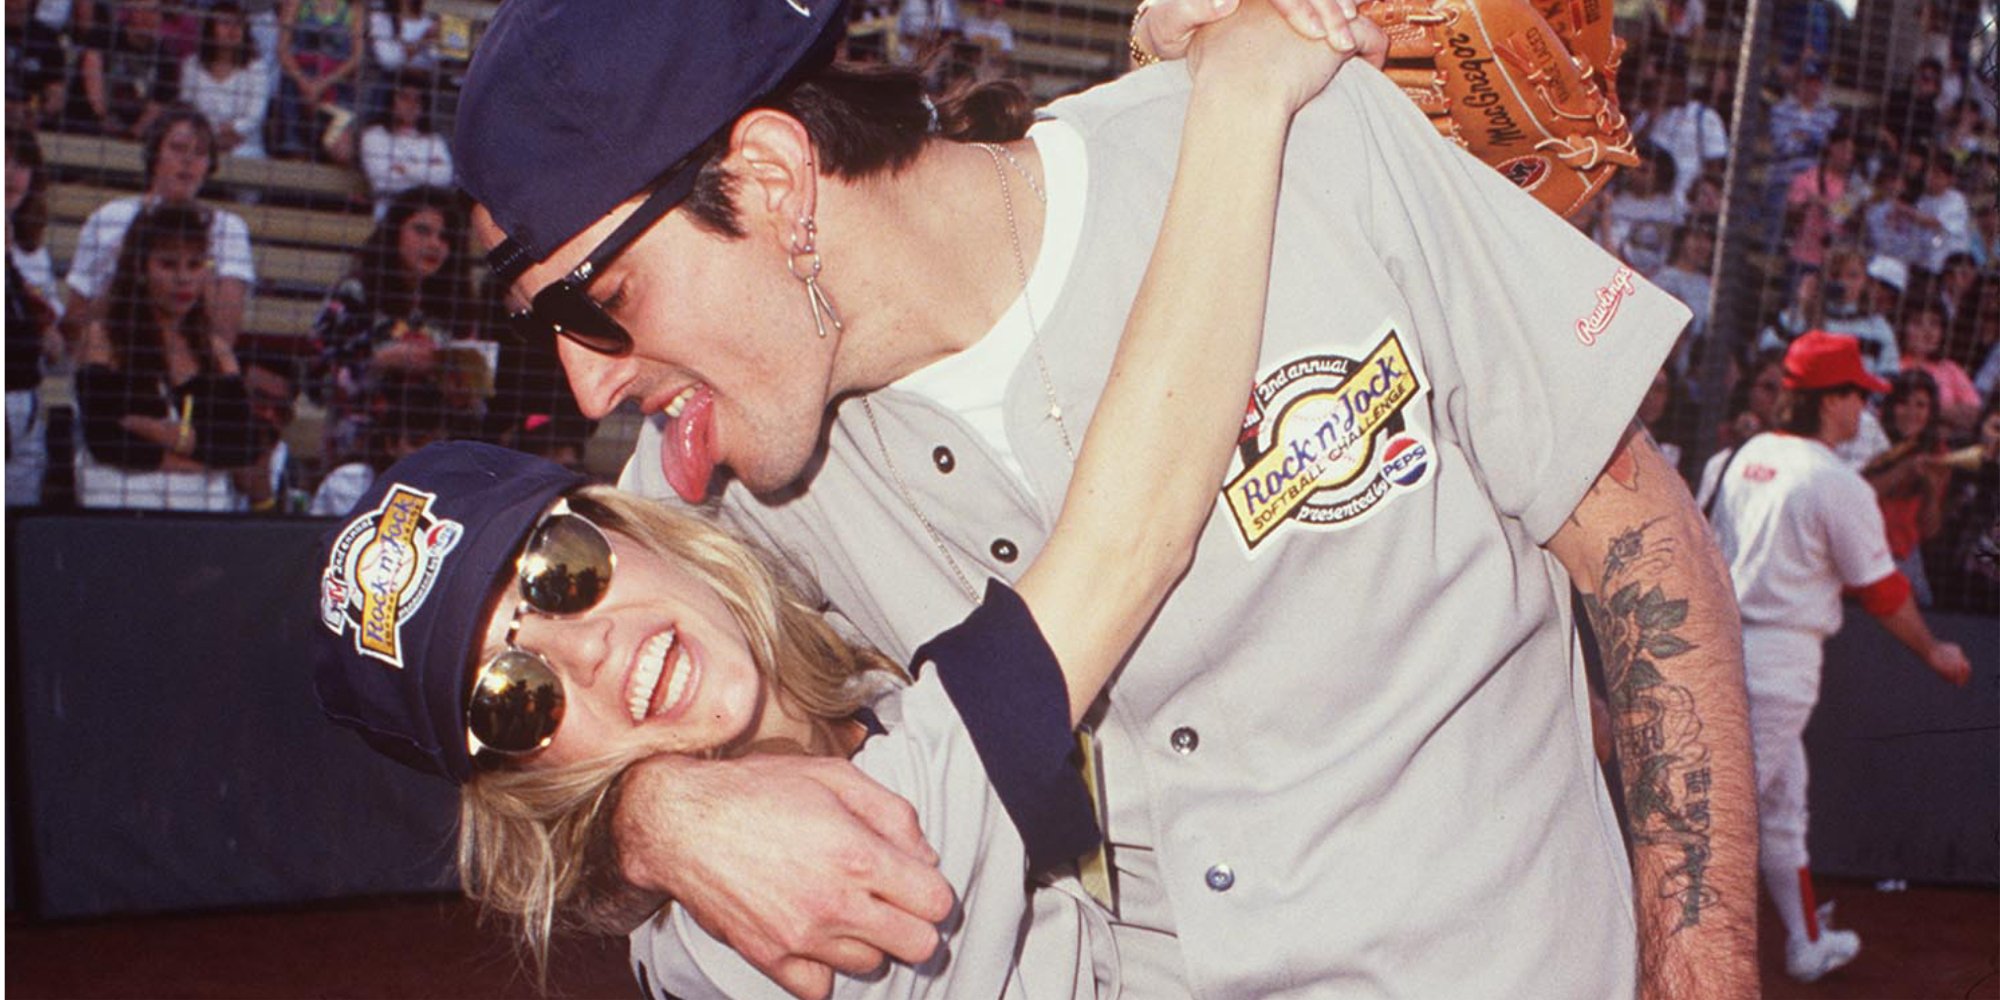 Heather Locklear and Tommy Lee at the Rock and Jock softball game in Los Angeles, California.